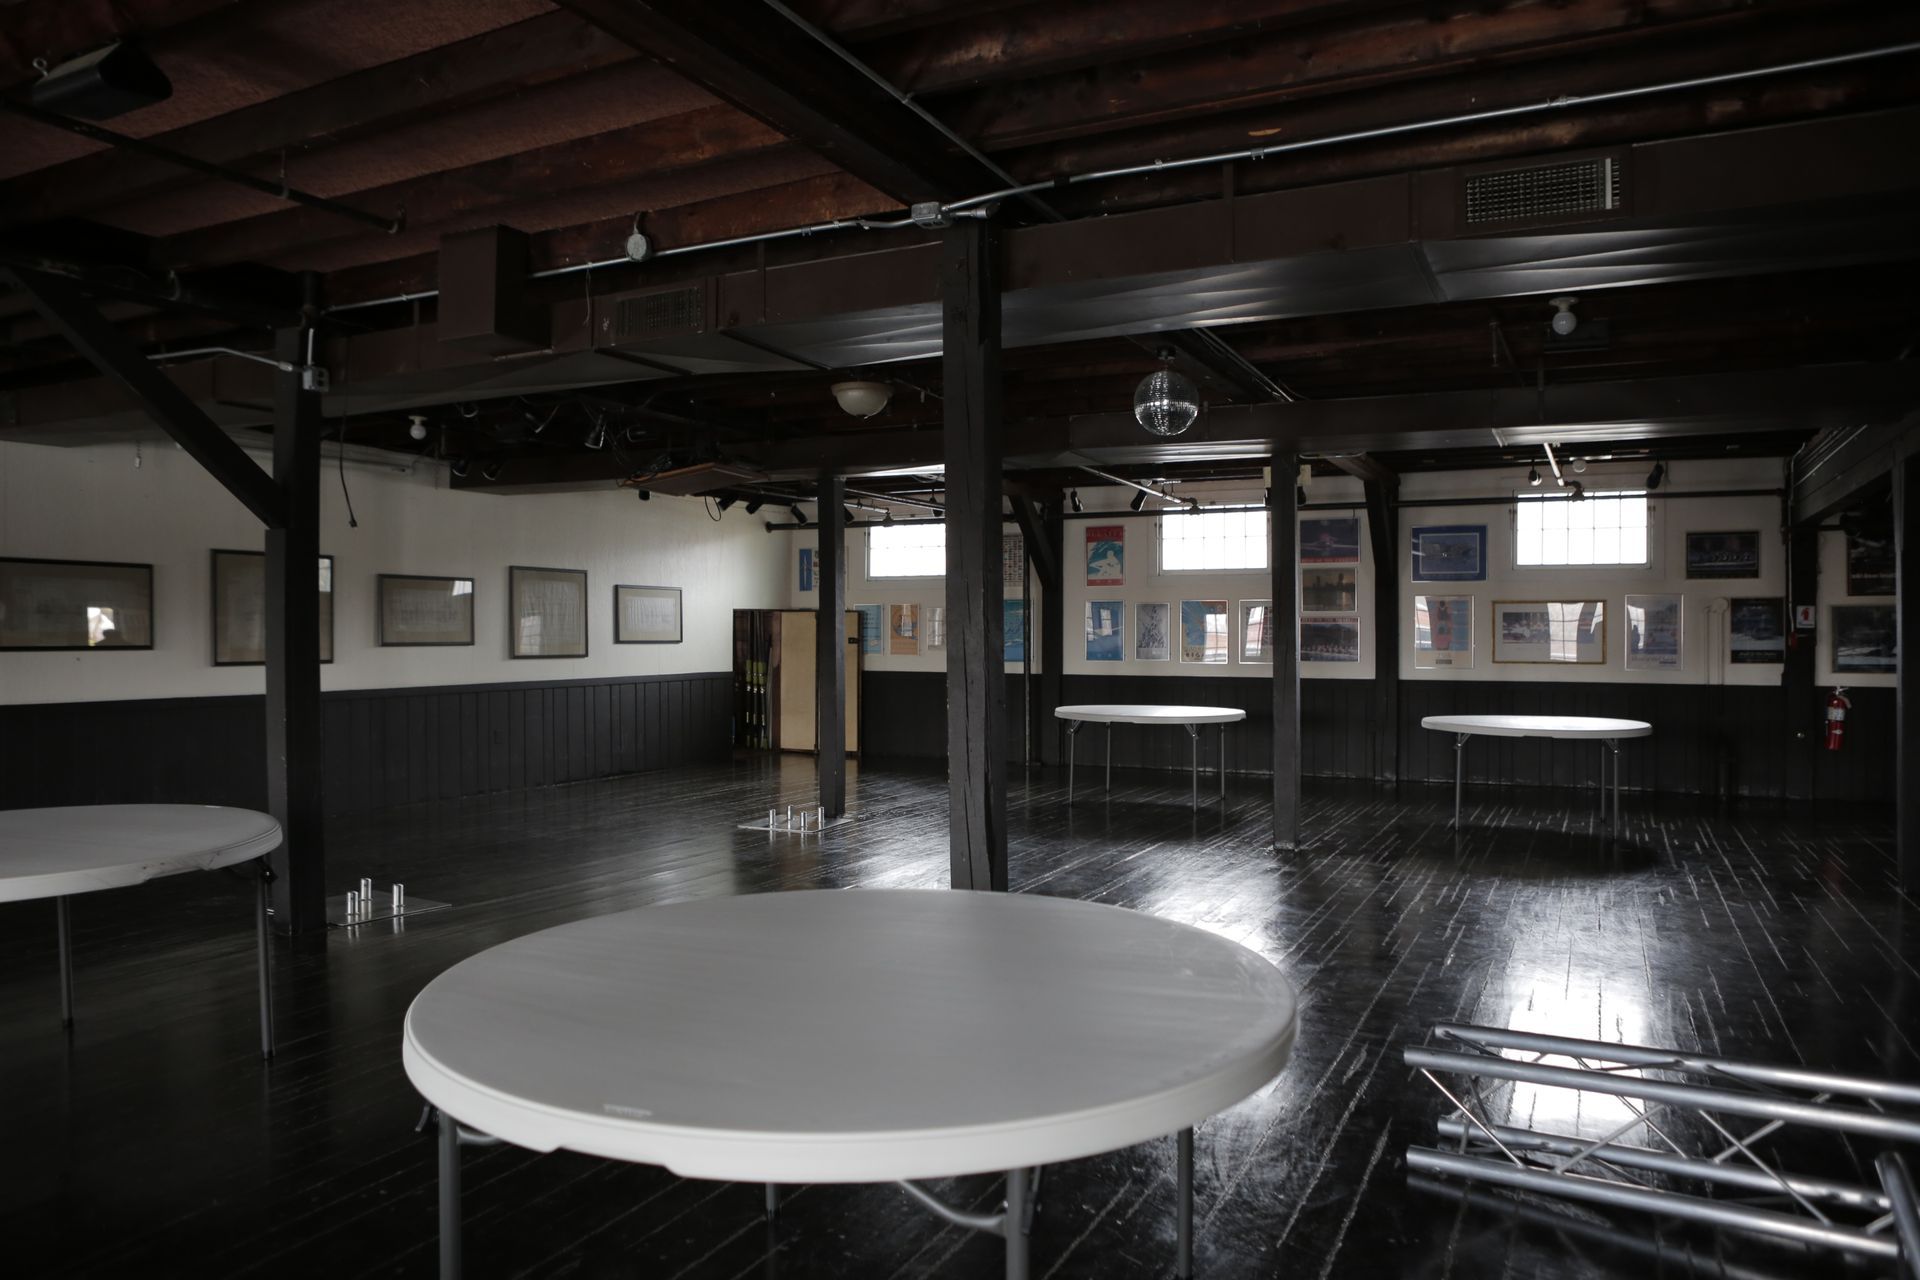 A large empty room with a round table in the middle